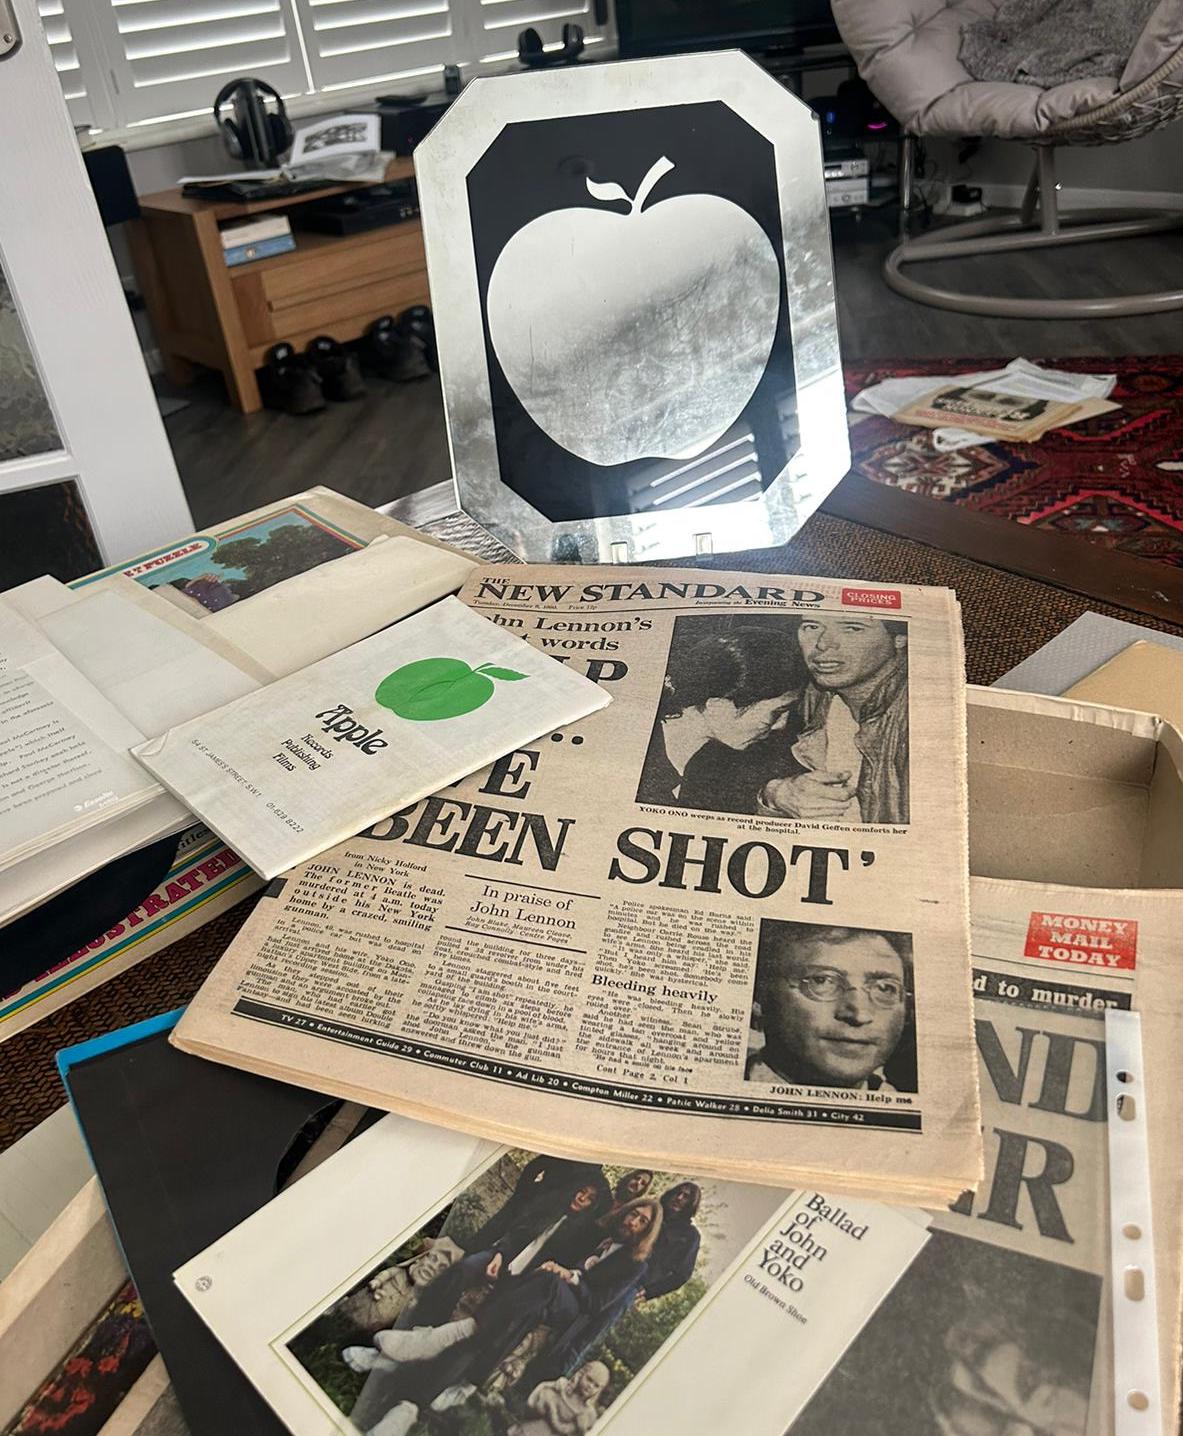 A collection of Beatles and Apple memorabilia